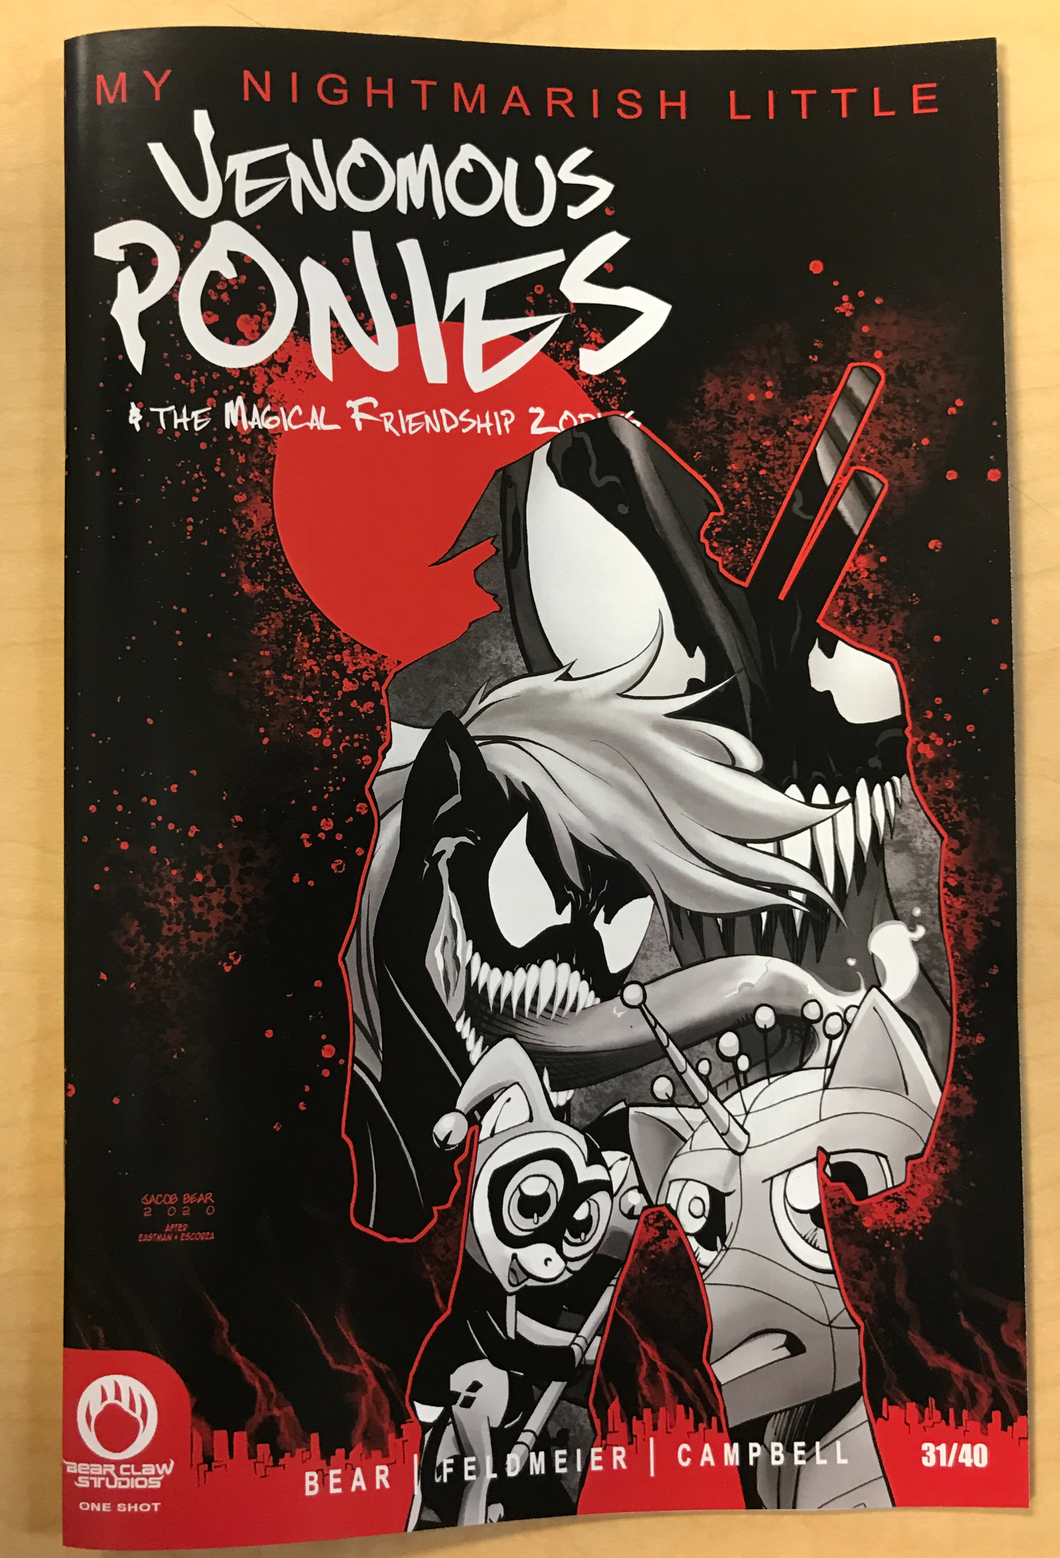 My Nightmarish Little Venomous Ponies & Magical Friendship Zombies #1 TMNT The Last Ronin #1 Eastman & Escorza Homage DRESS Variant Cover by Jacob Bear Strictly Limited to Only 40 Serial Numbered Copies!!!